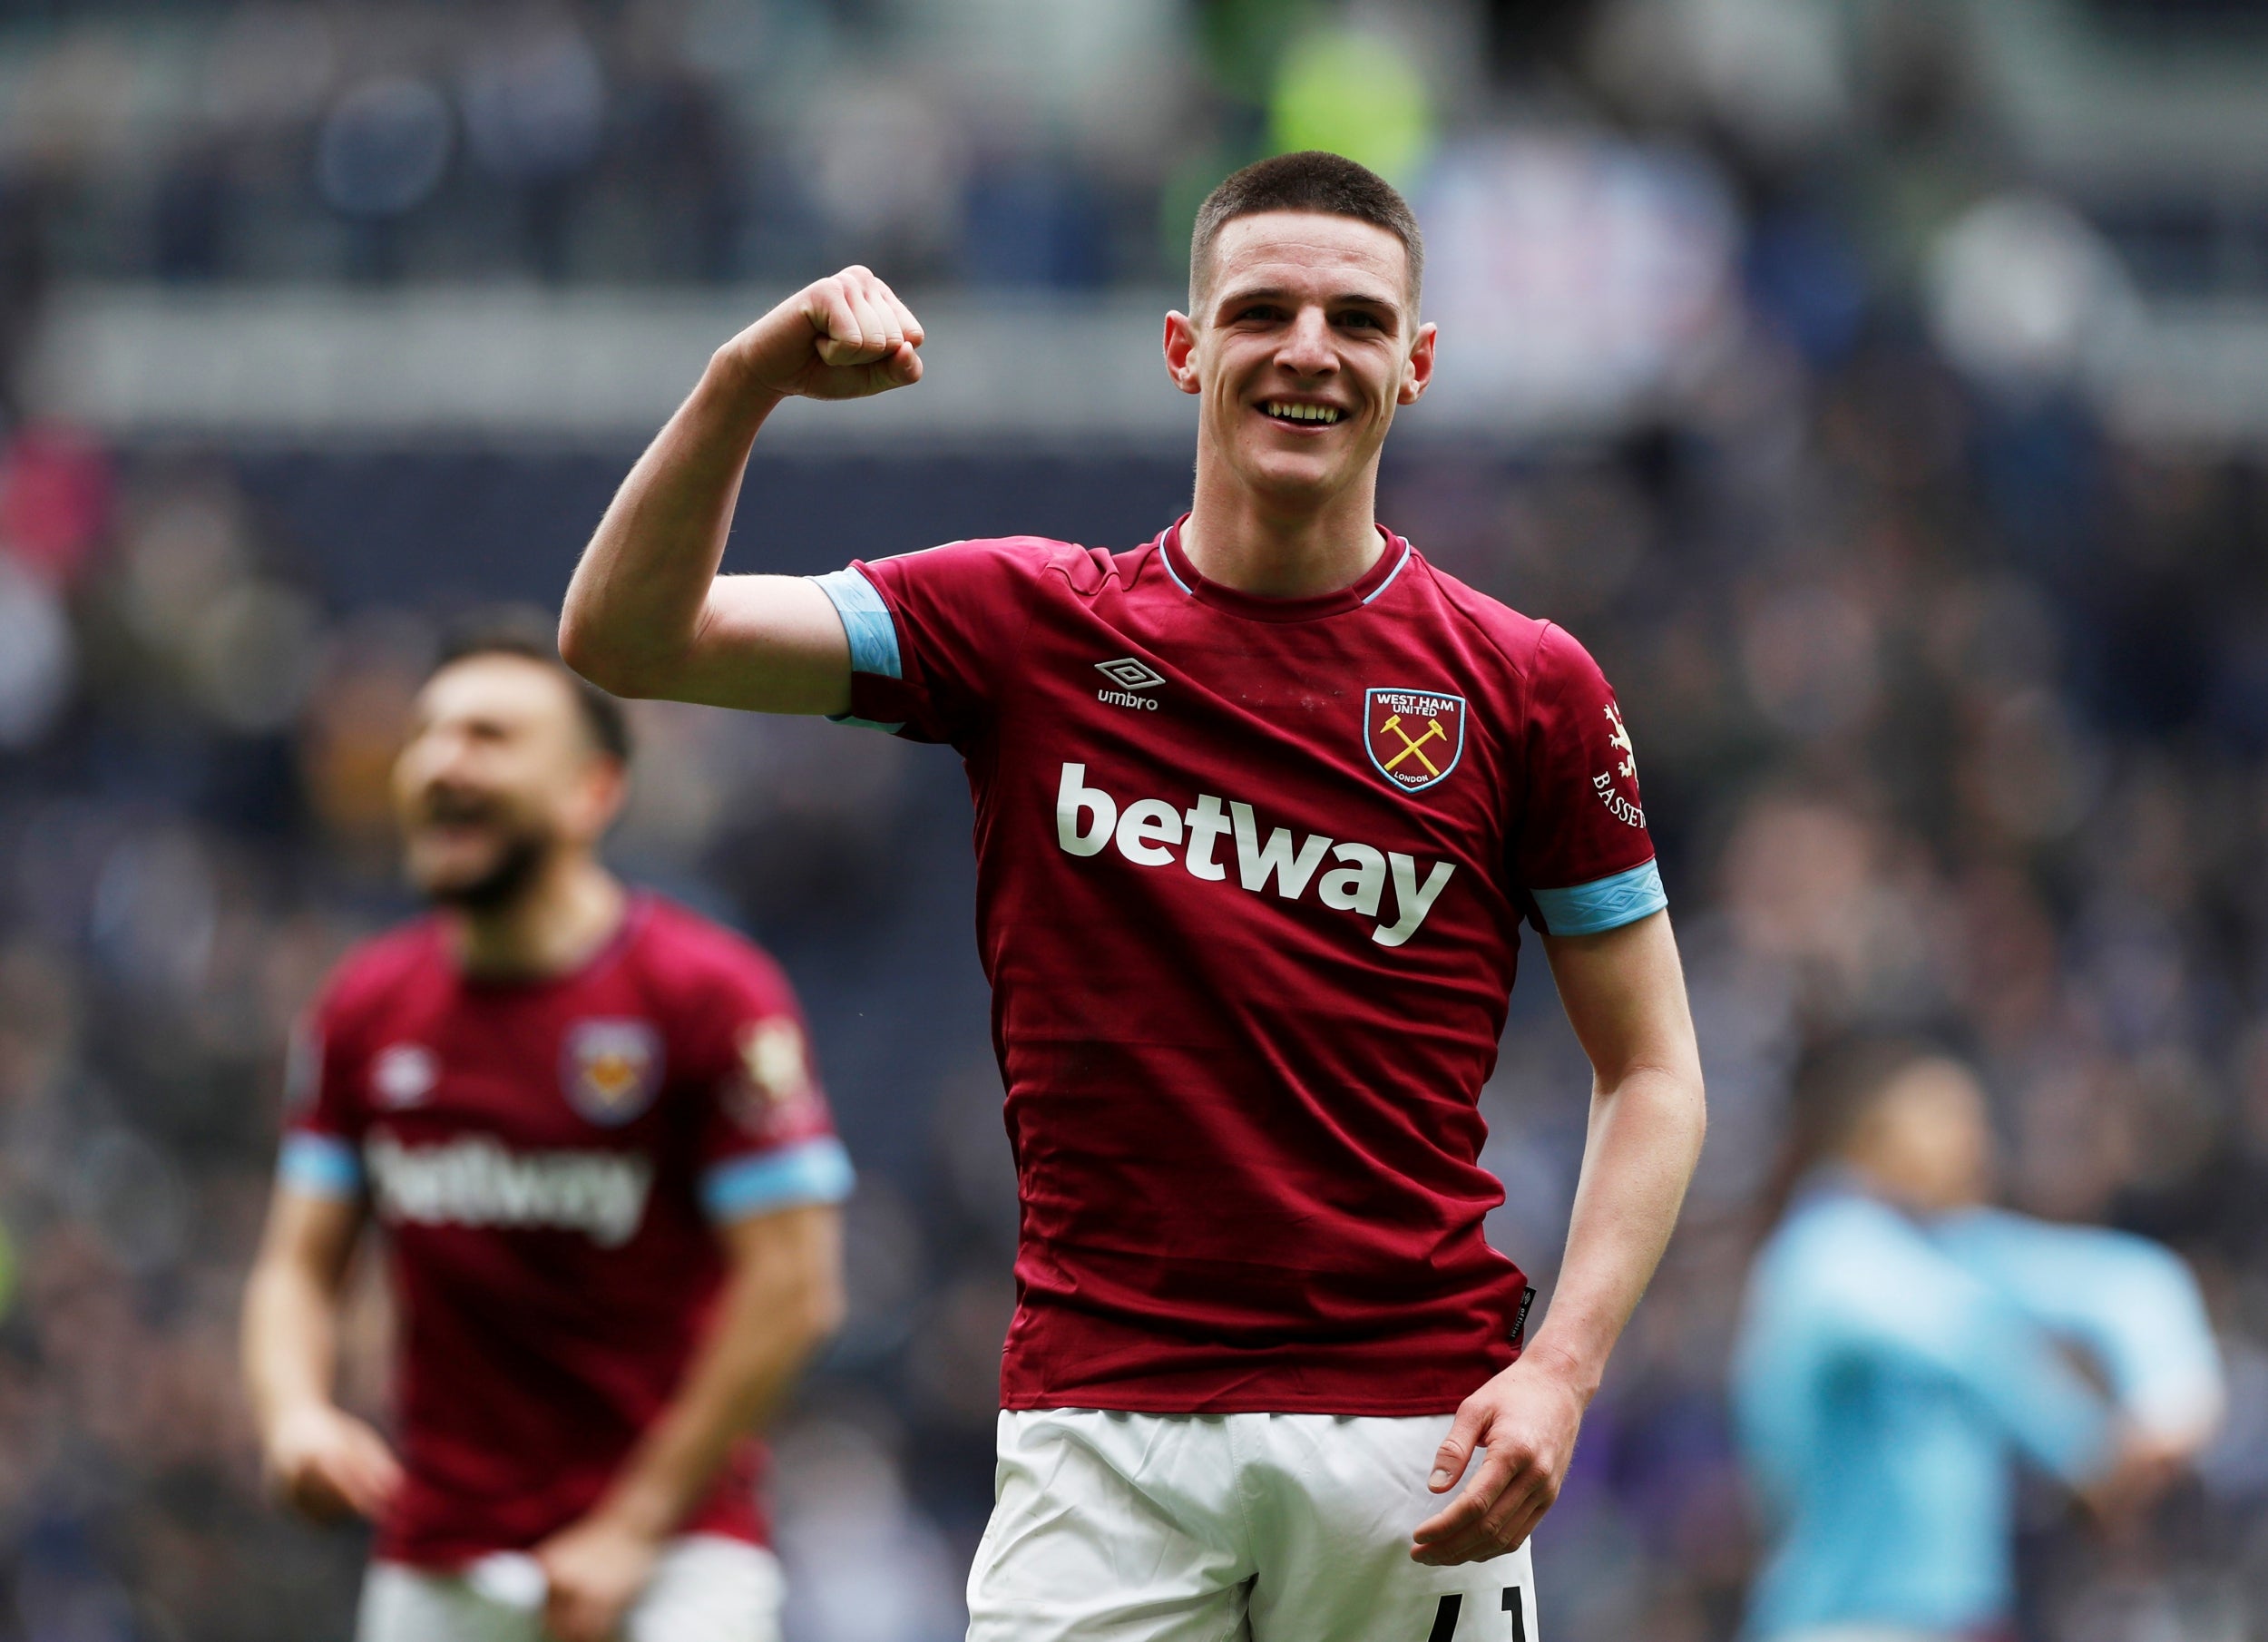 Rice enjoyed a breakout season for West Ham